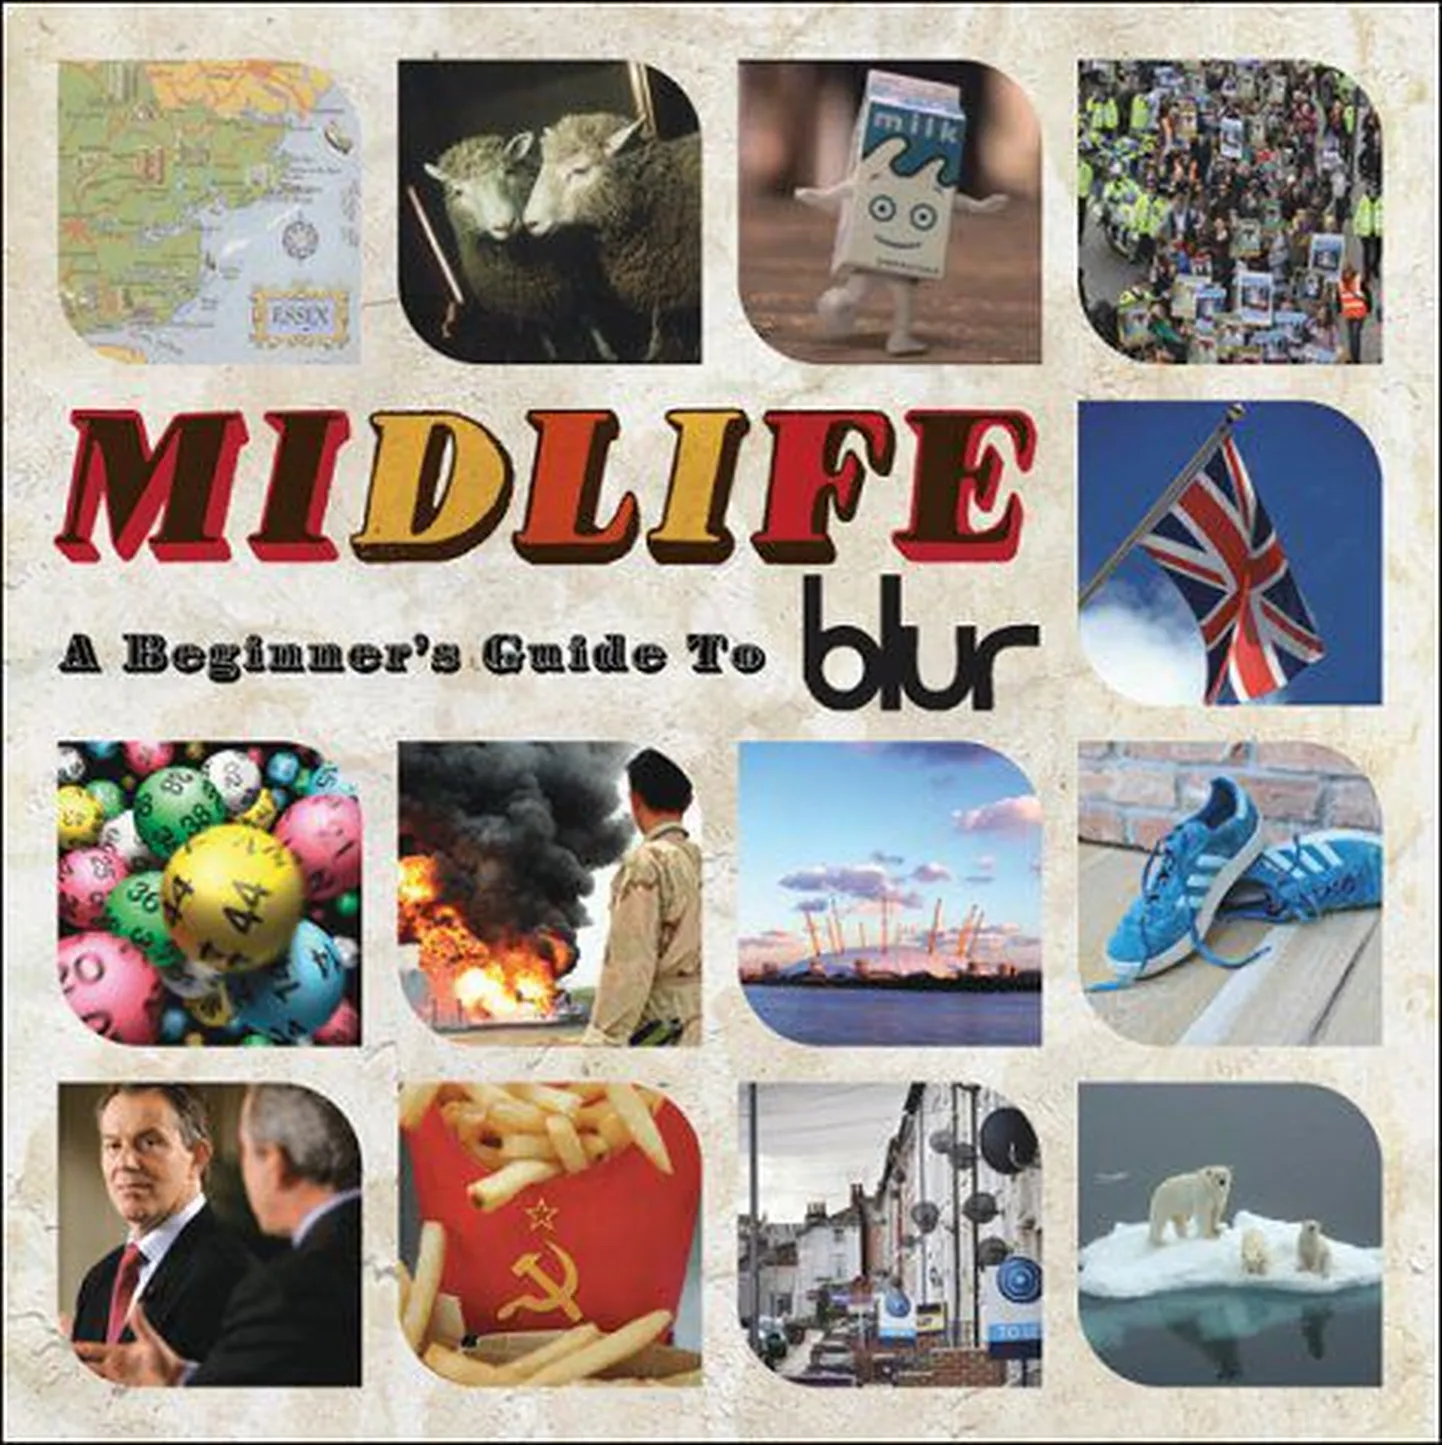 Blur “Midlife: A Beginner’s Guide To Blur”.